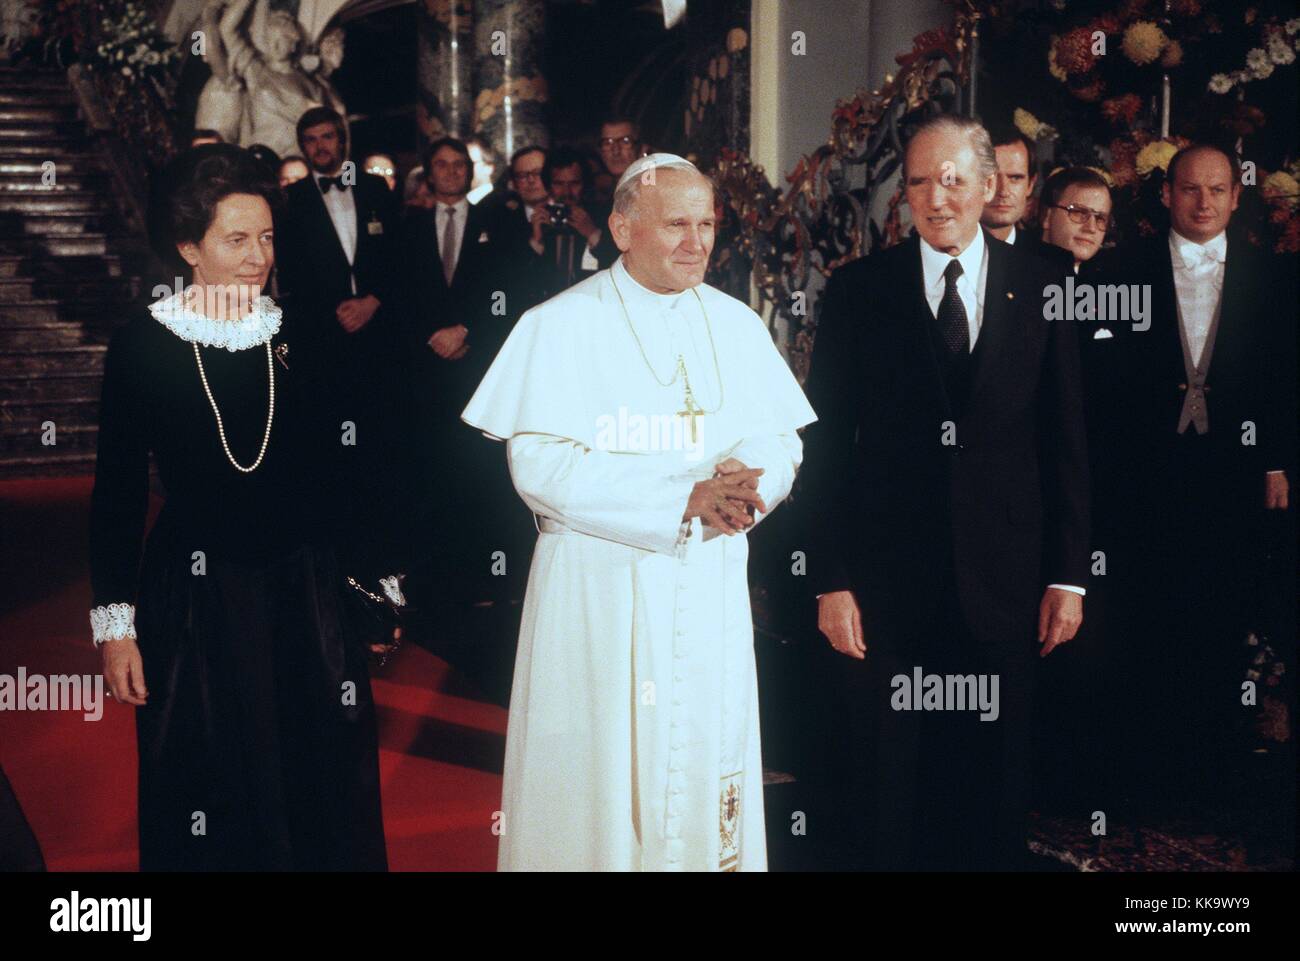 Veronica Carstens, Pope John Paul II and Federal President Karl Carstens, from left to right, during a reception for the Pope at Augustenburg Castle on 15th November 1980. | usage worldwide Stock Photo